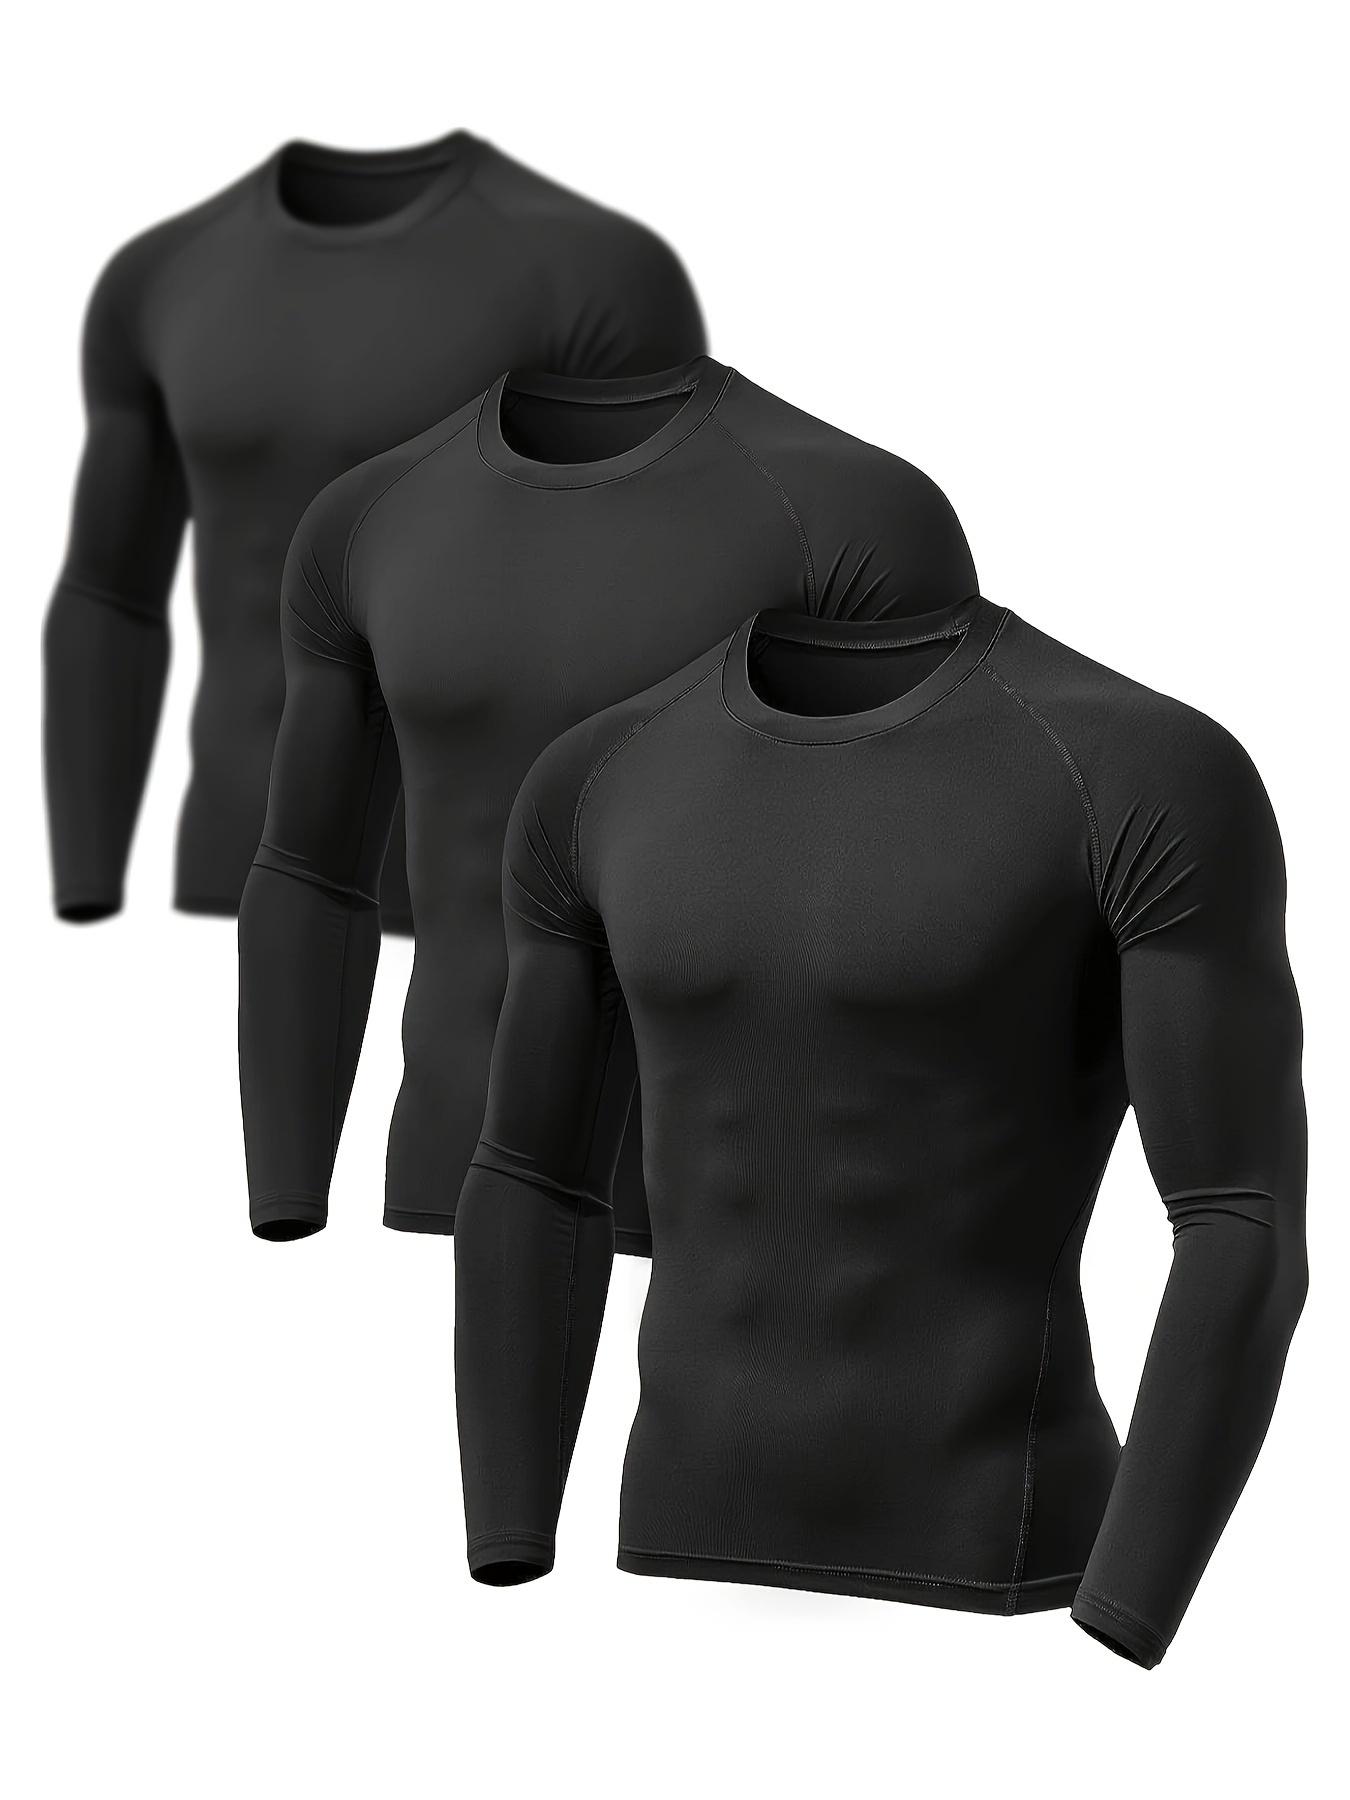 CW Plain Compression Top Full Sleeve Black Athletic Fit Sports Inner Wear